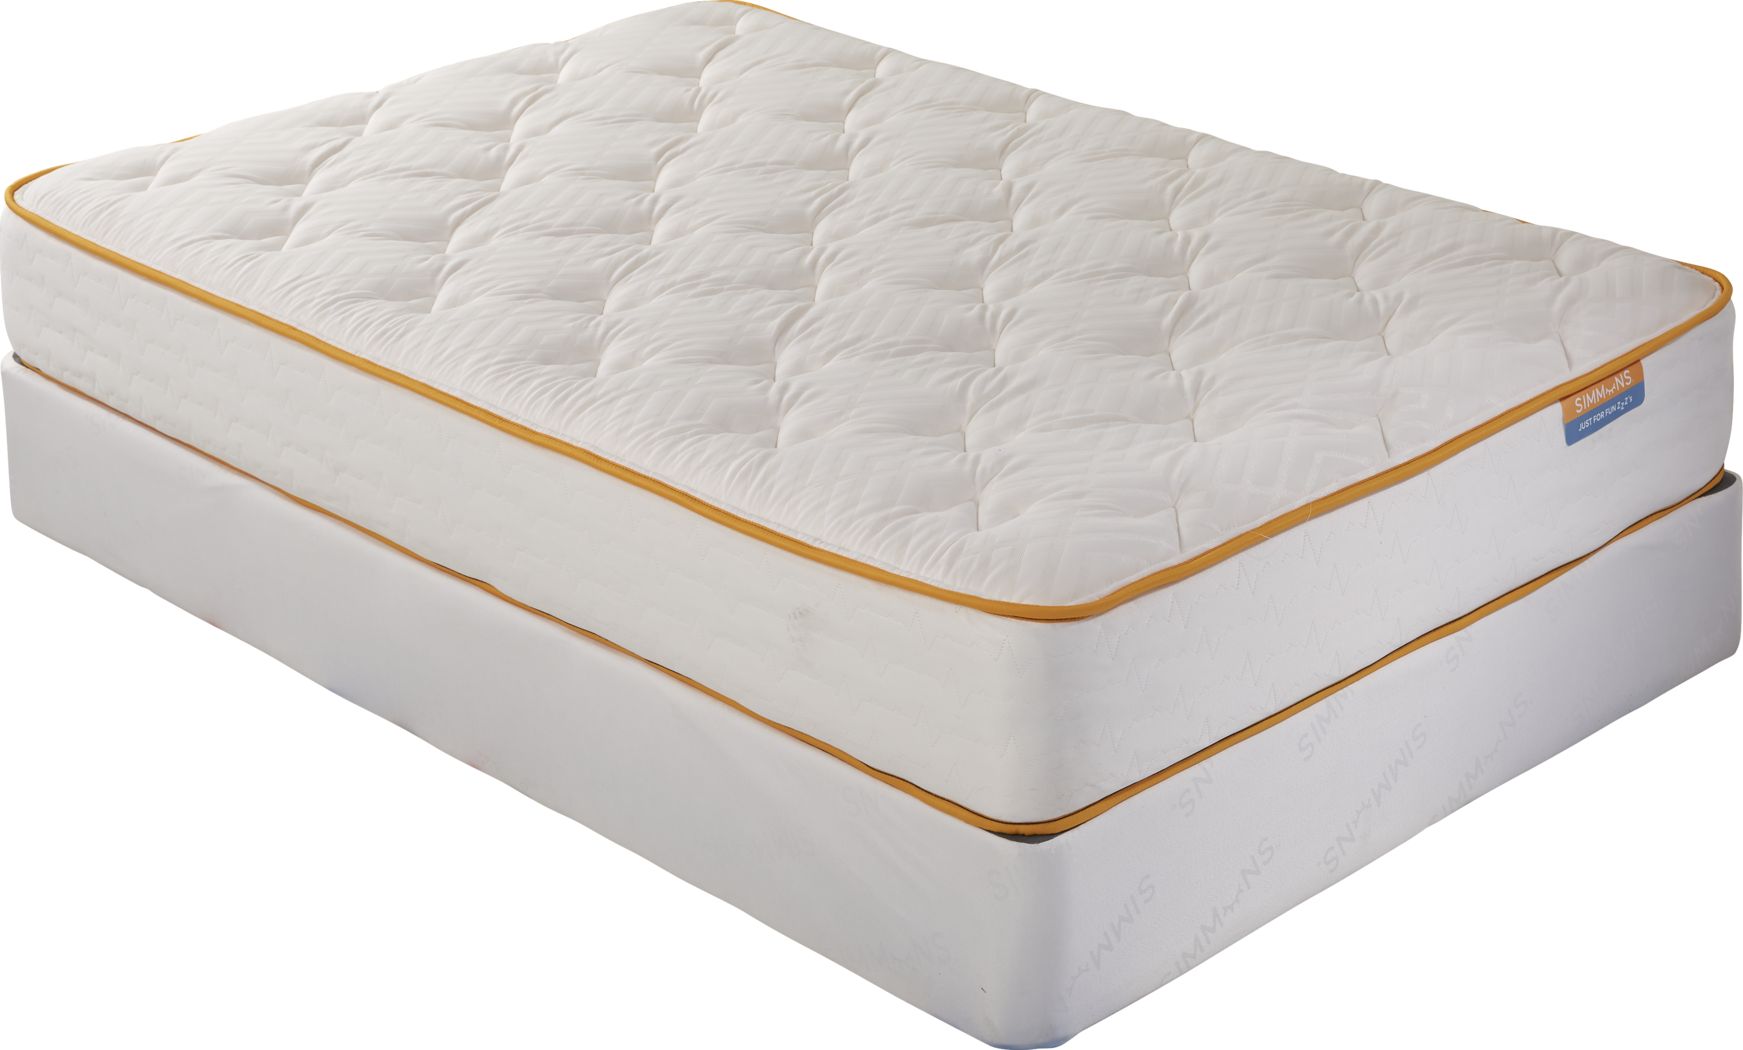 simmons mattresses for sale